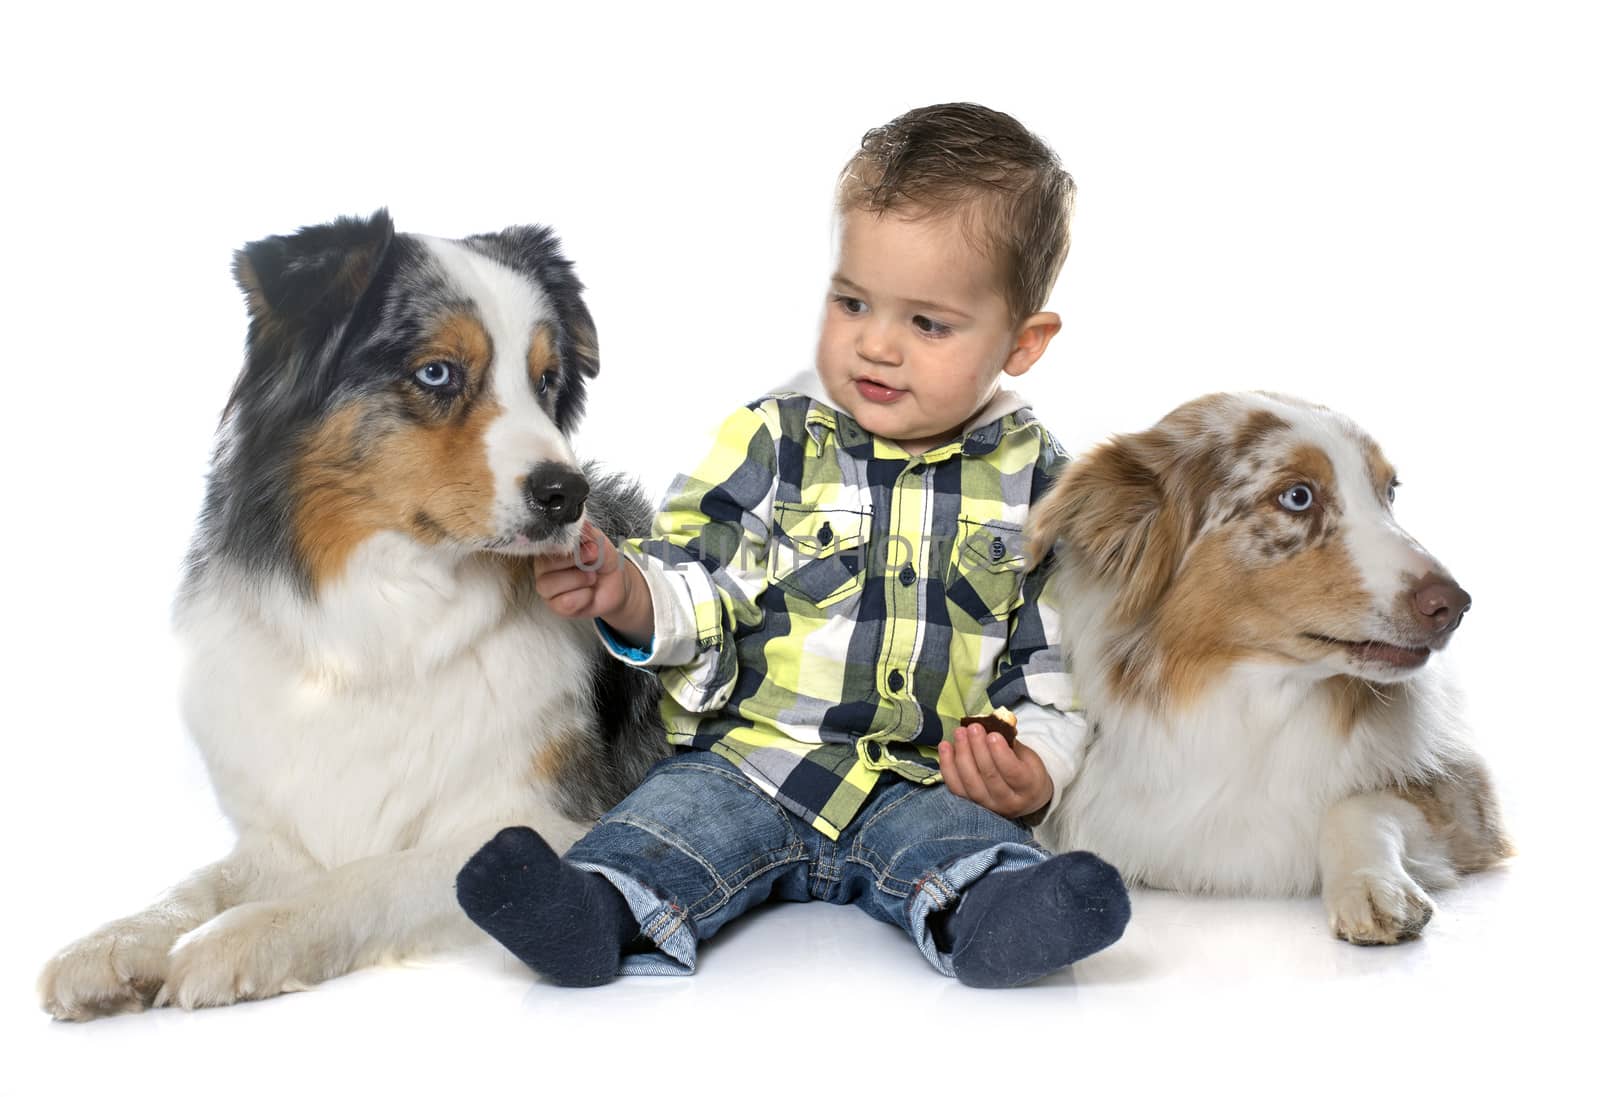 little boy and dogs in front of white background